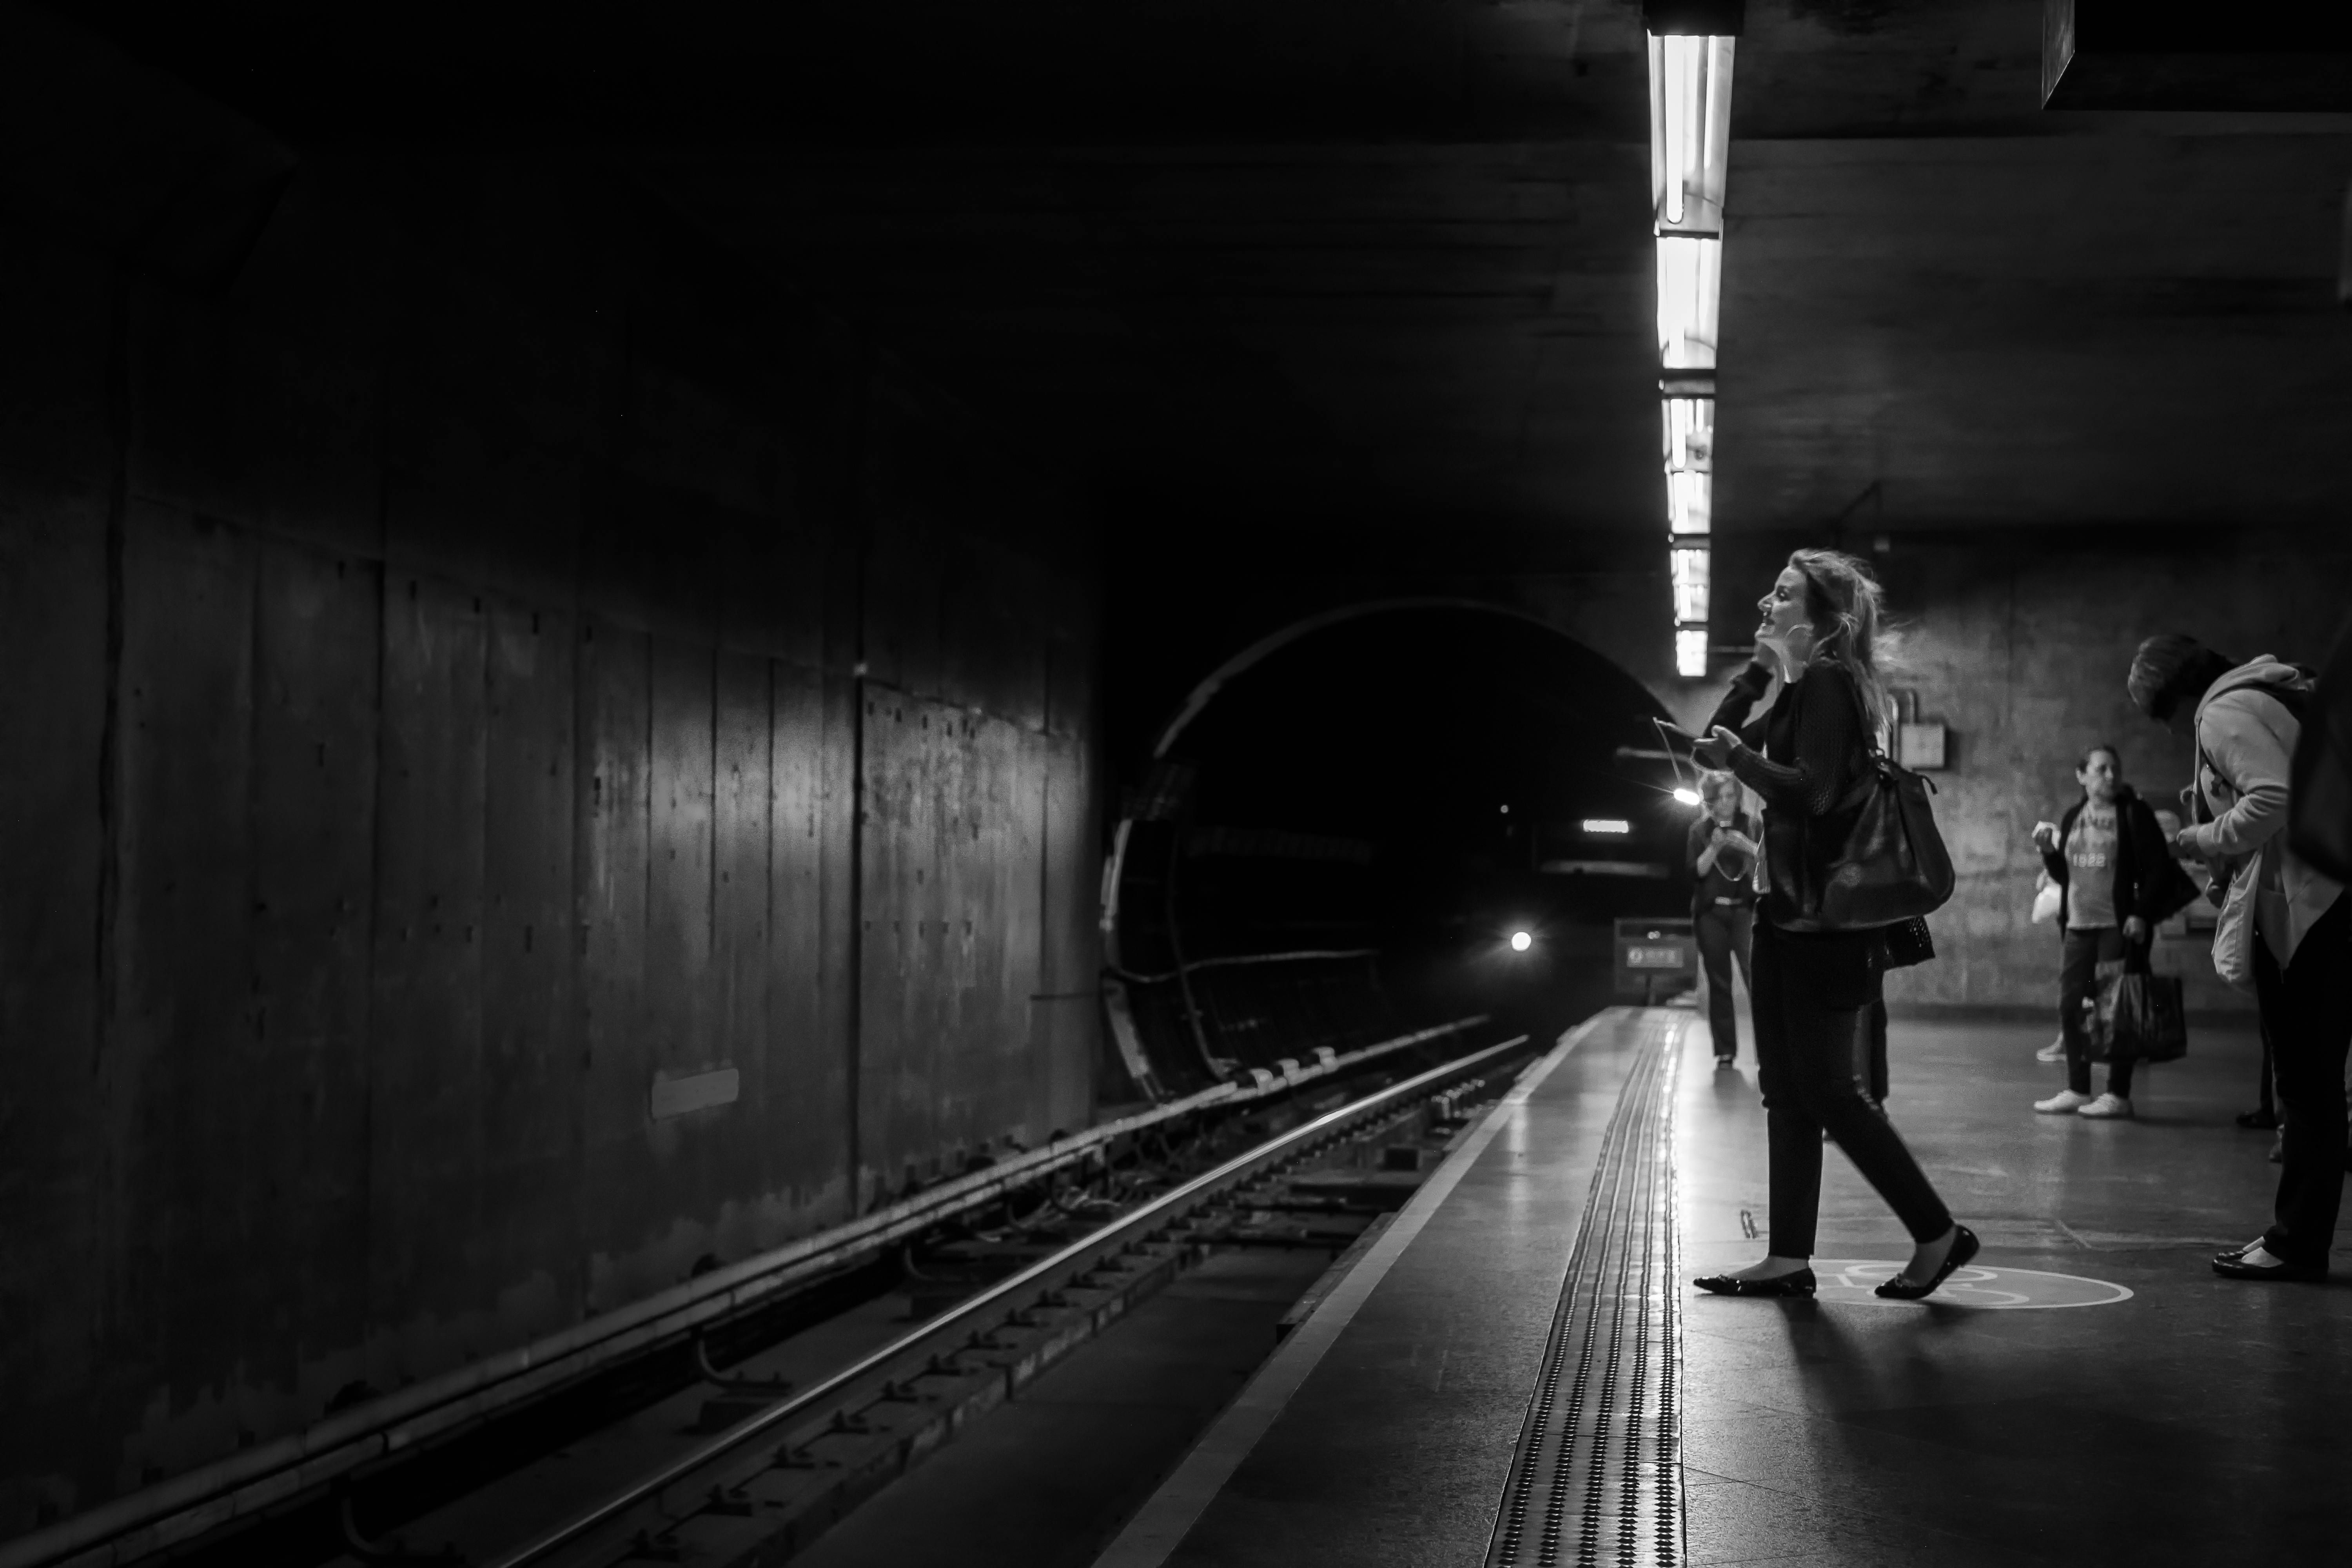 Monochrome Photo of People Standing In Subway